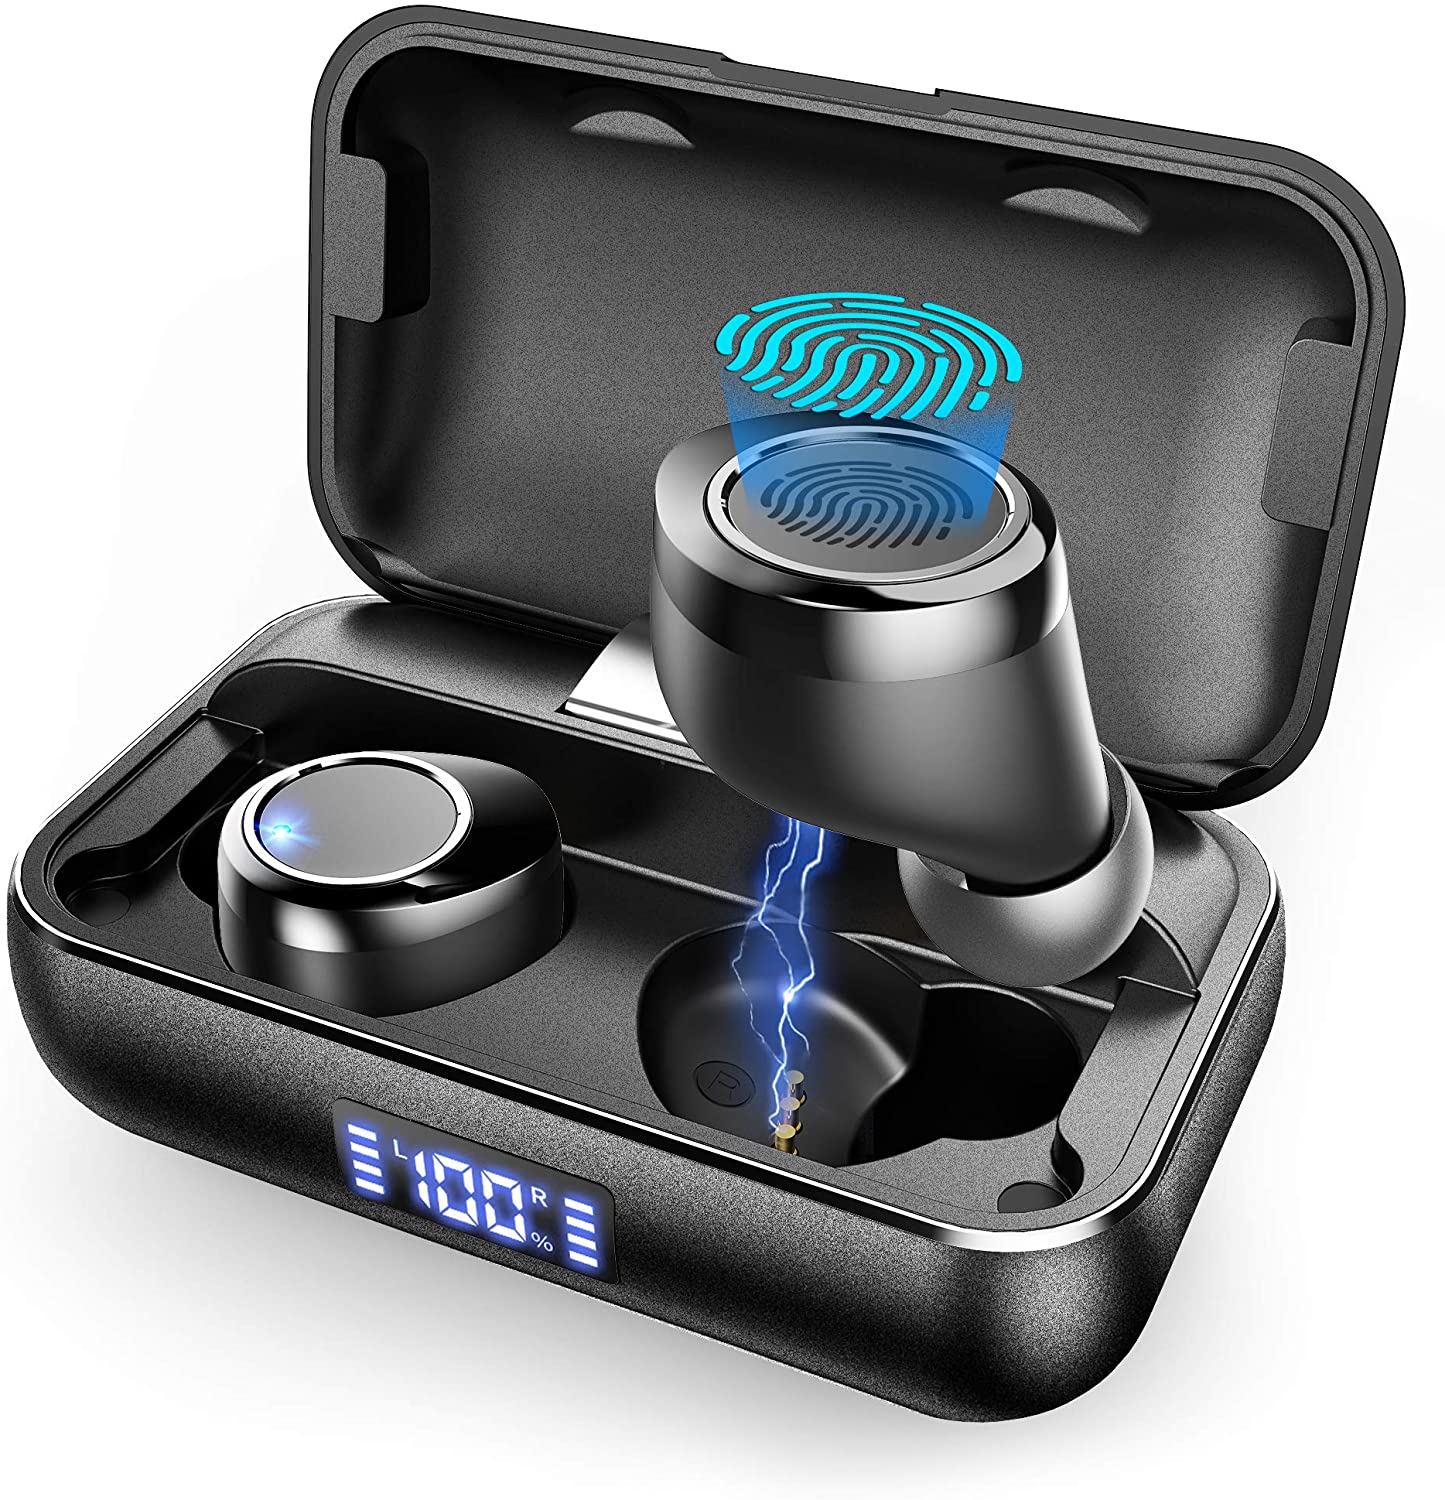 Top 5 best wireless and Bluetooth earbuds under $30, $25 in 2020 ...